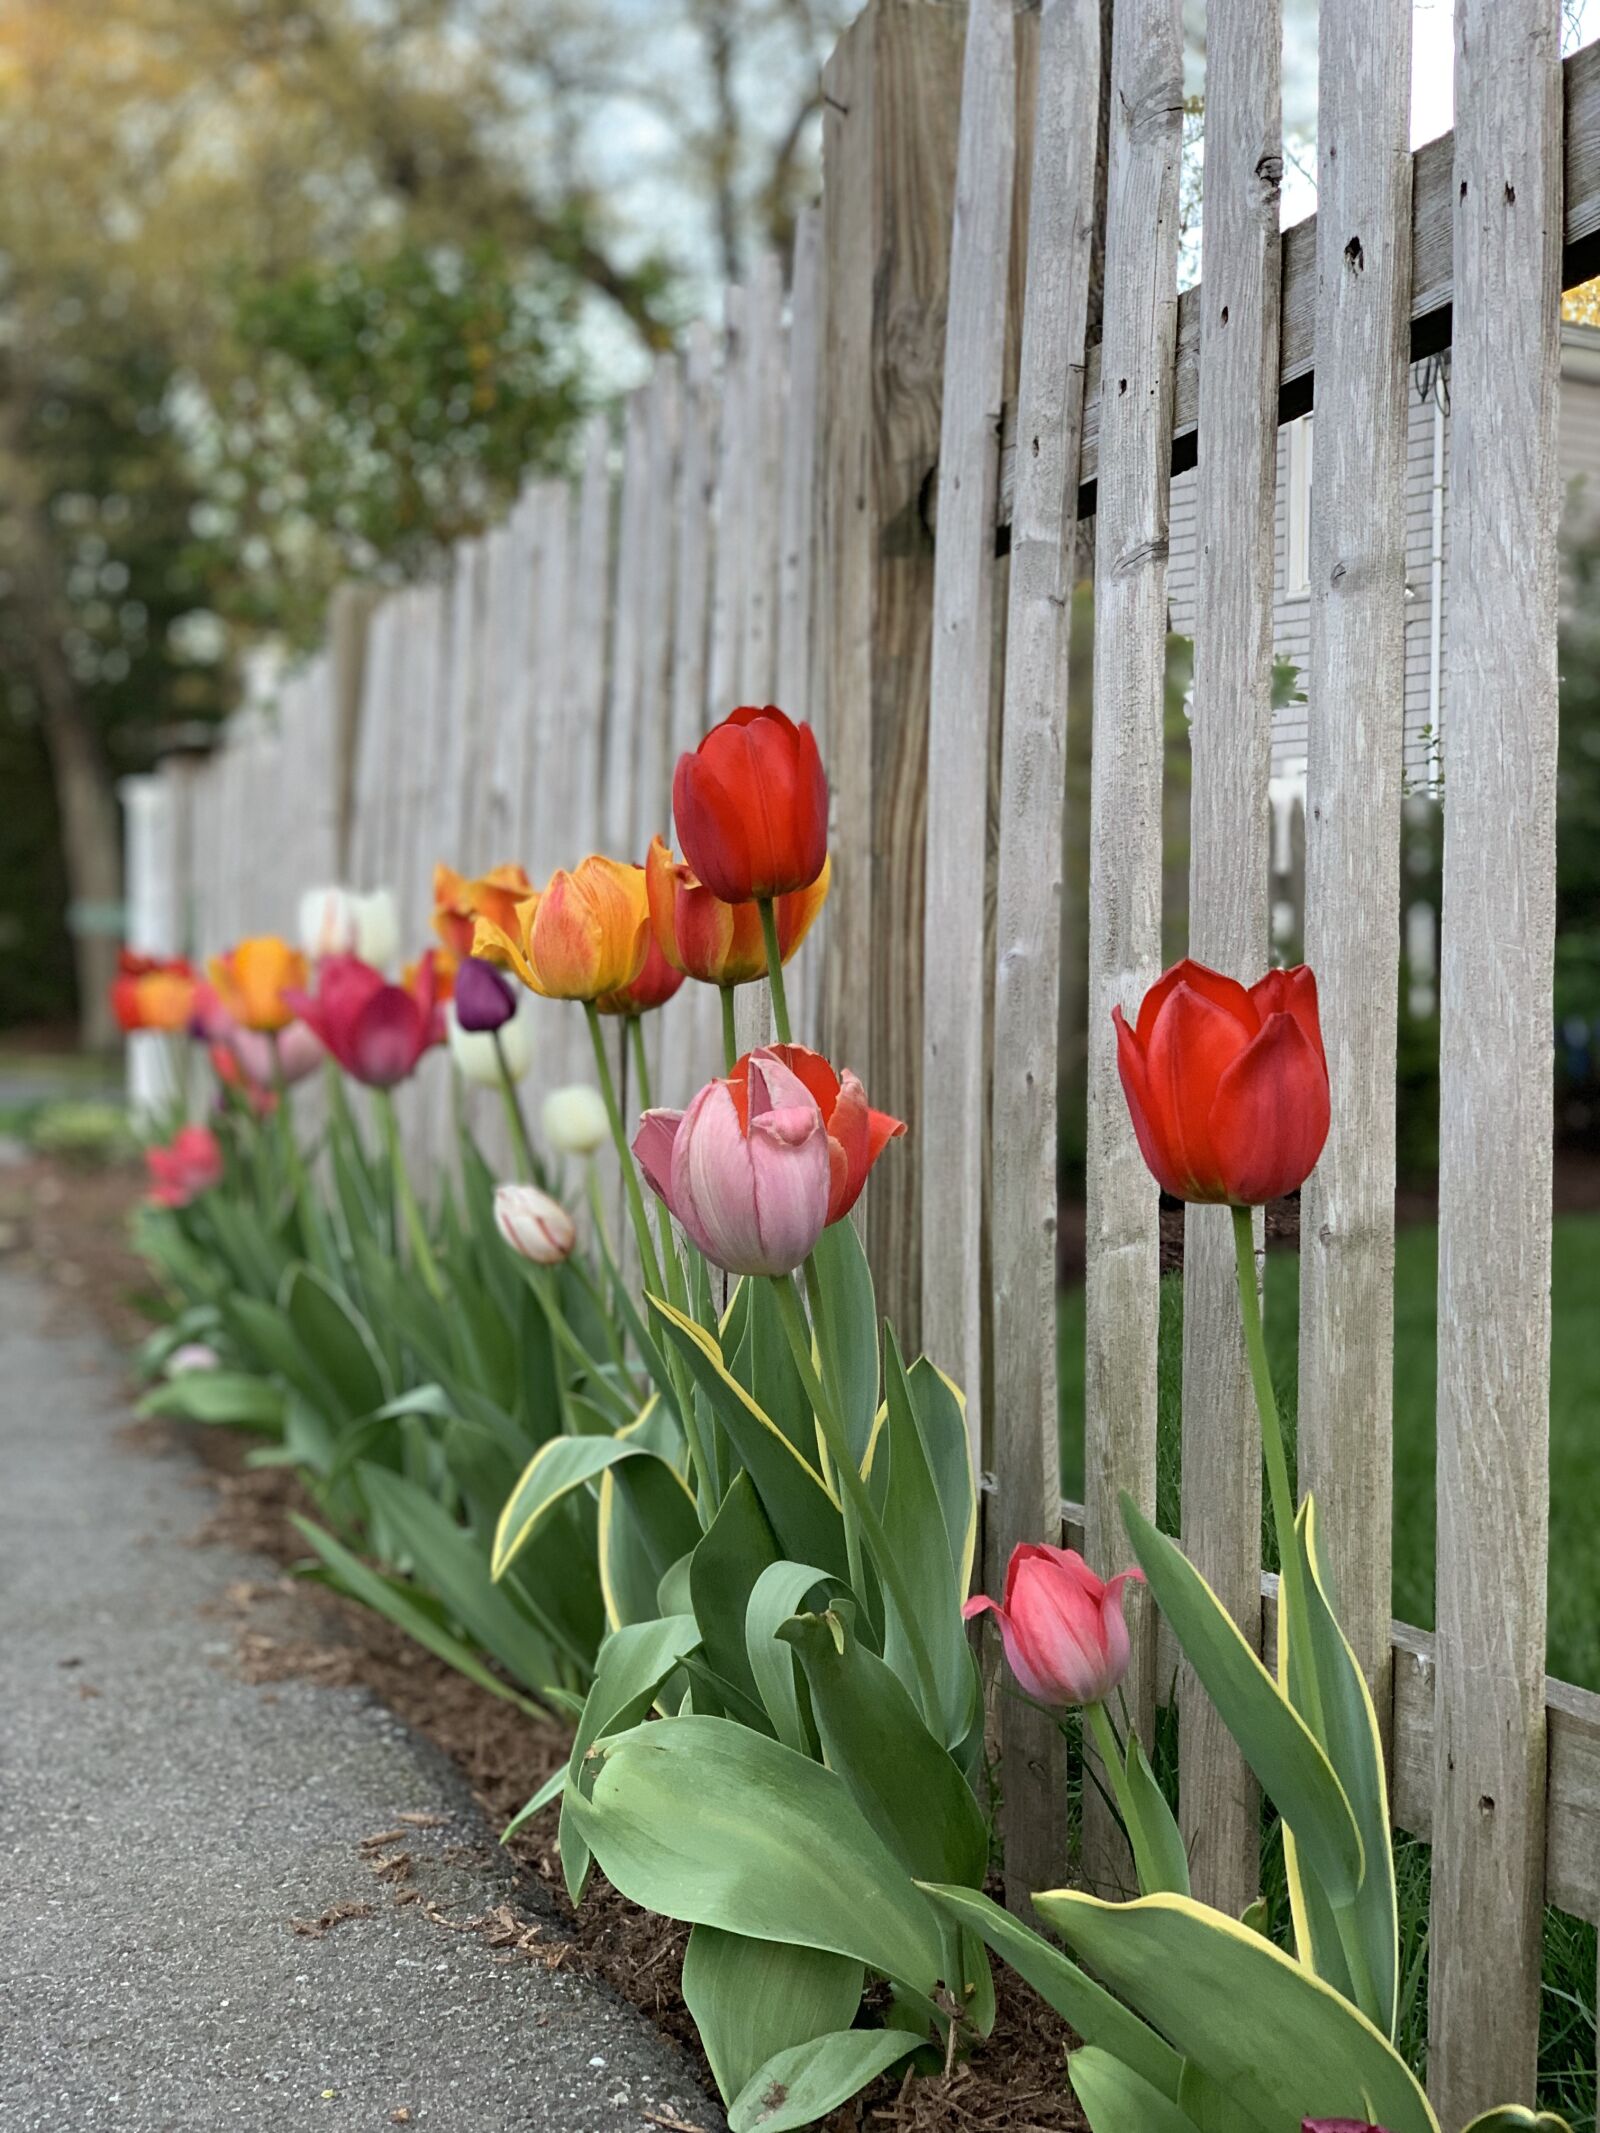 Apple iPhone XS Max + iPhone XS Max back dual camera 6mm f/2.4 sample photo. Tulips, fence, flowers photography